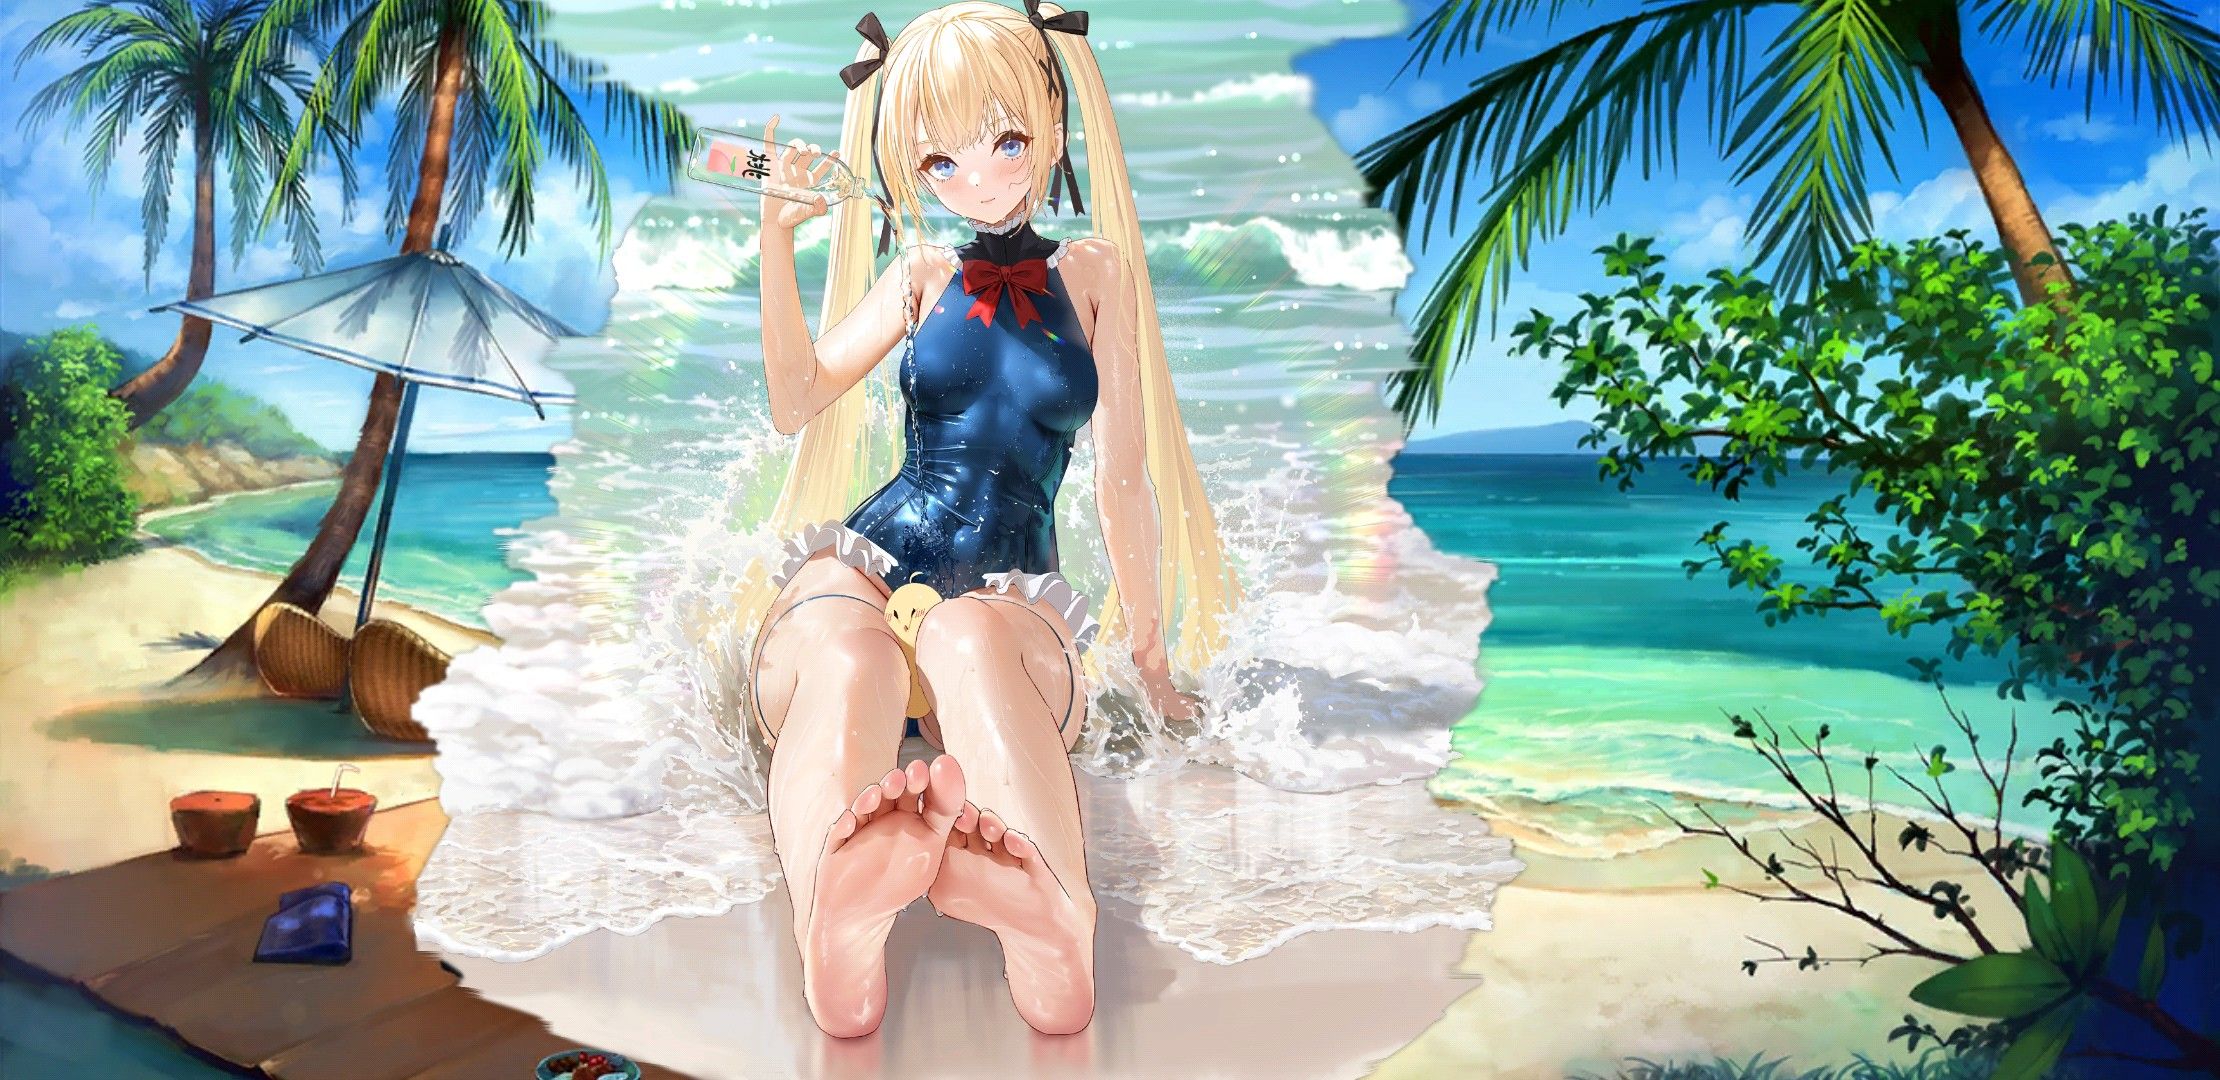 【There is an image】 Smartphone that urges charging with erotic swimsuits is malicious 9